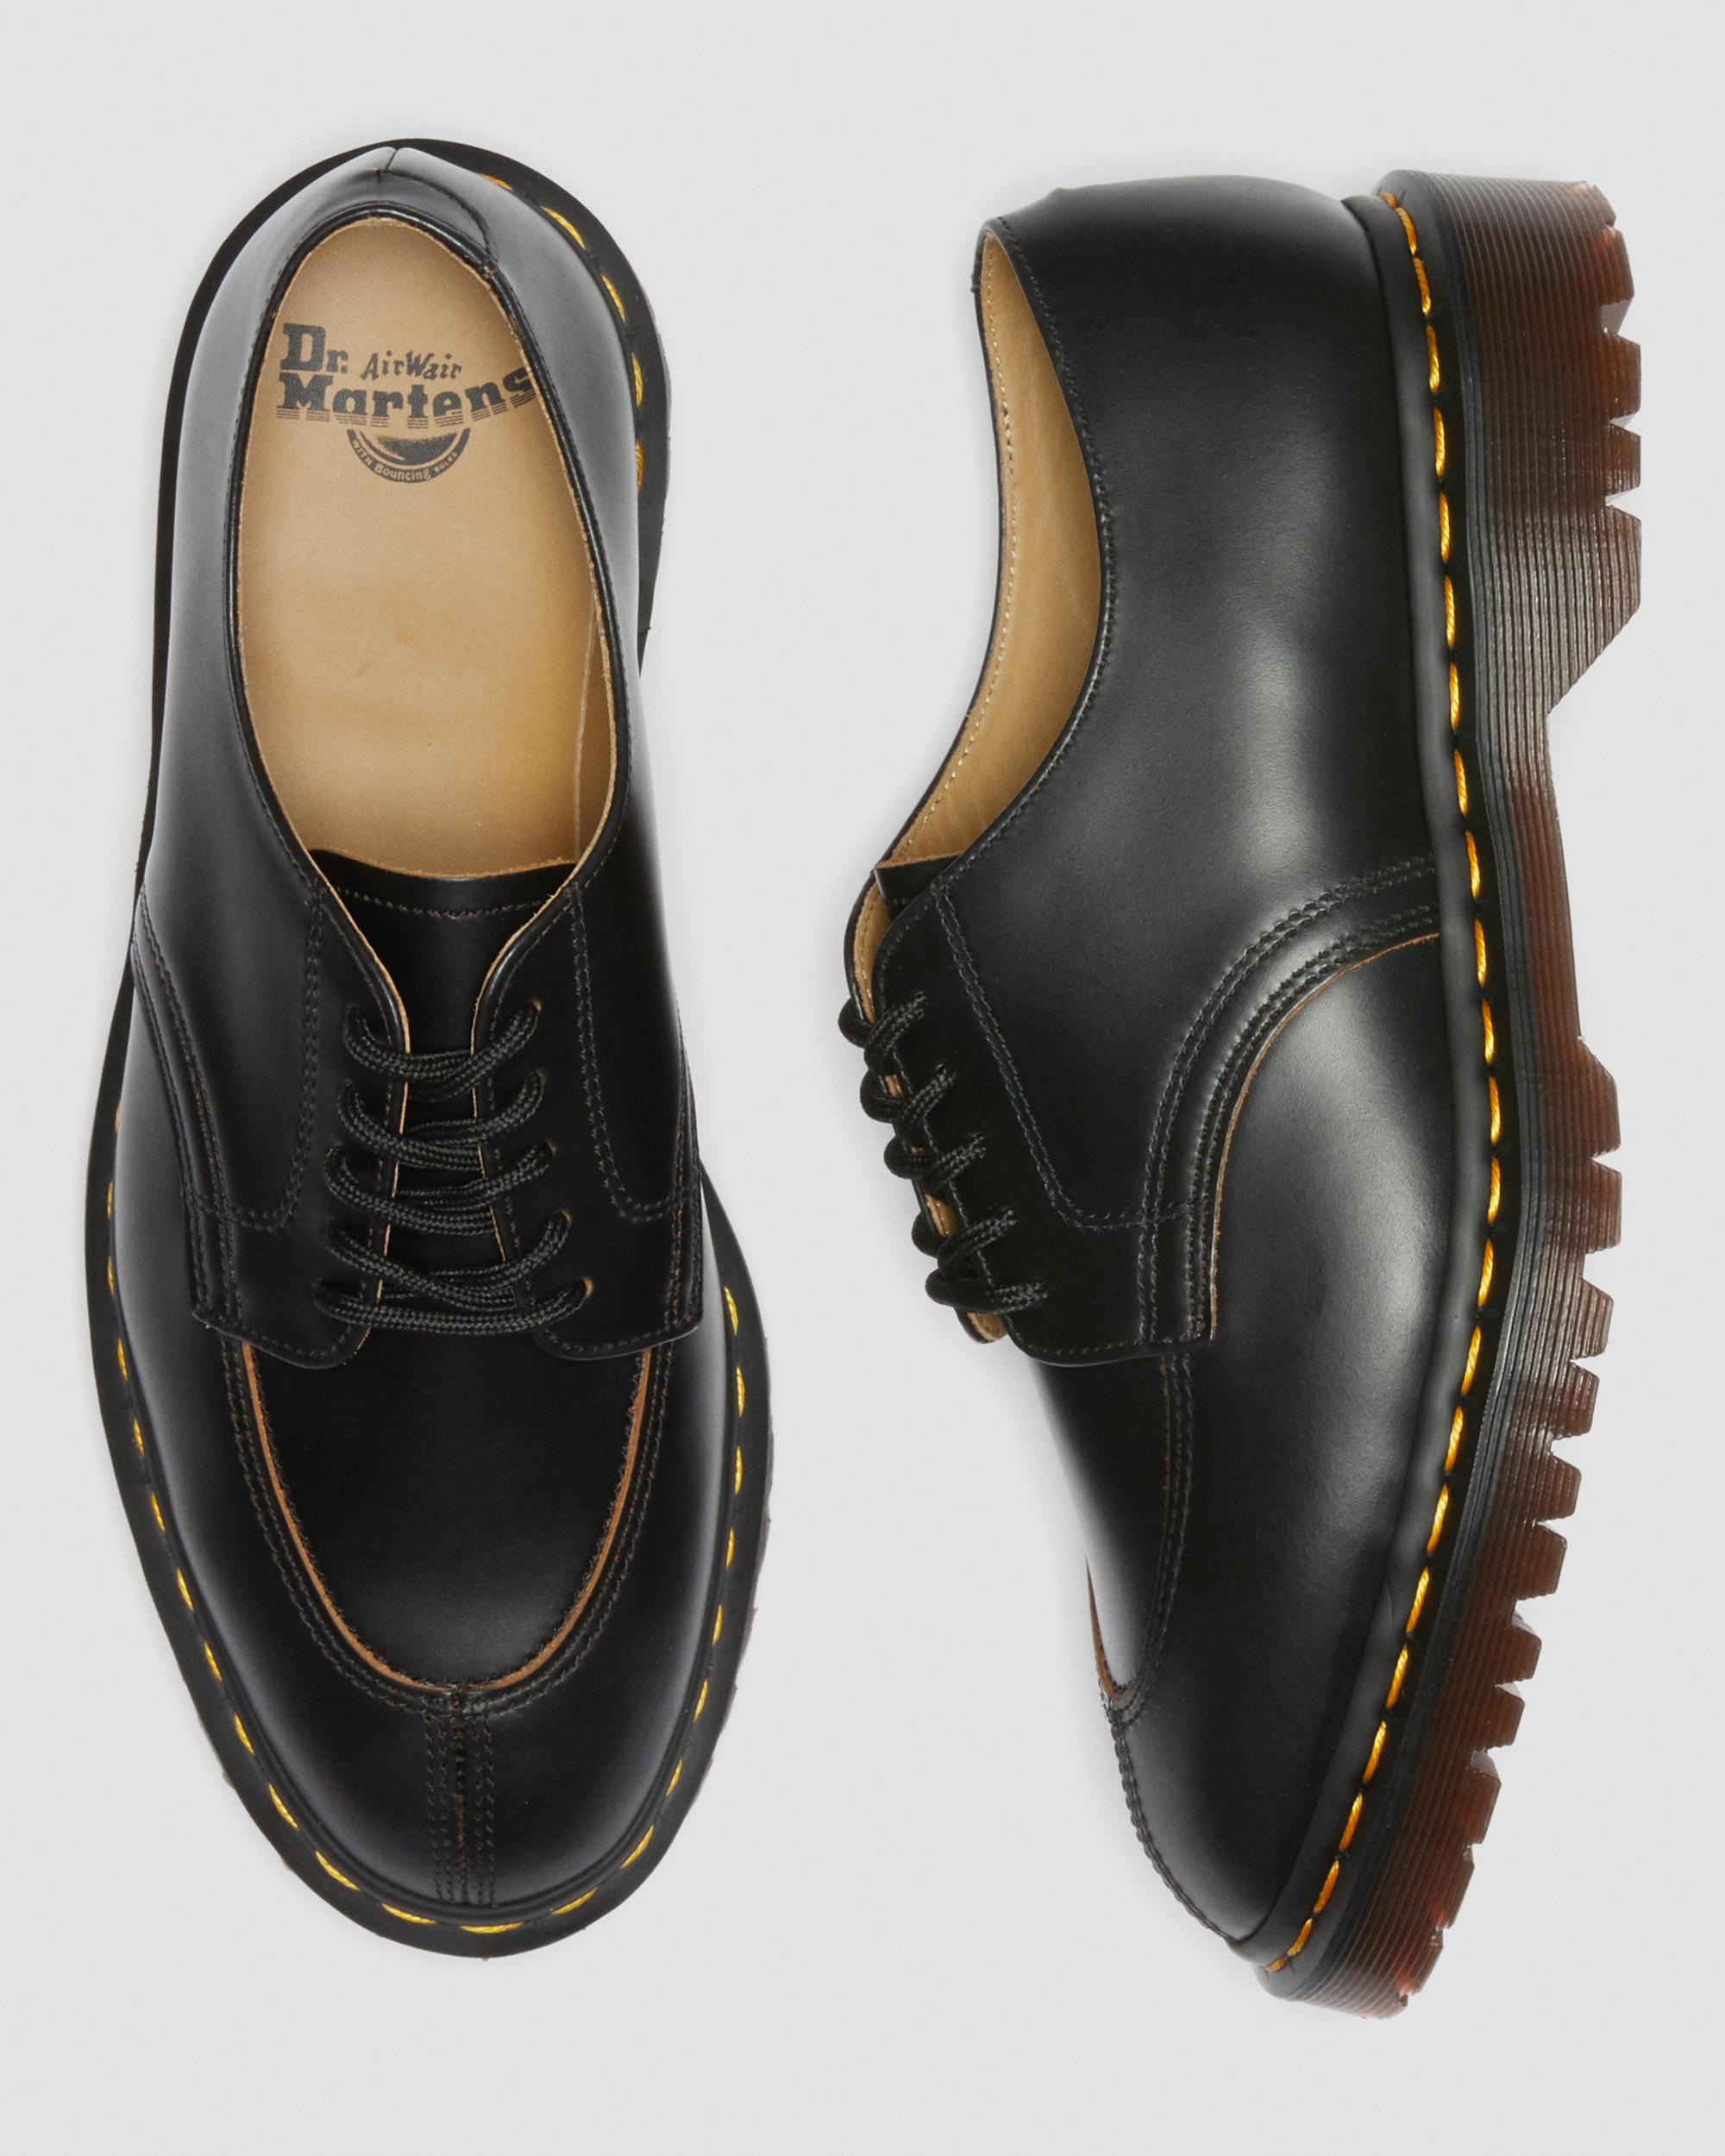 2046 Vintage Smooth Leather  Shoes2046 Vintage Smooth Leather  Shoes Dr. Martens